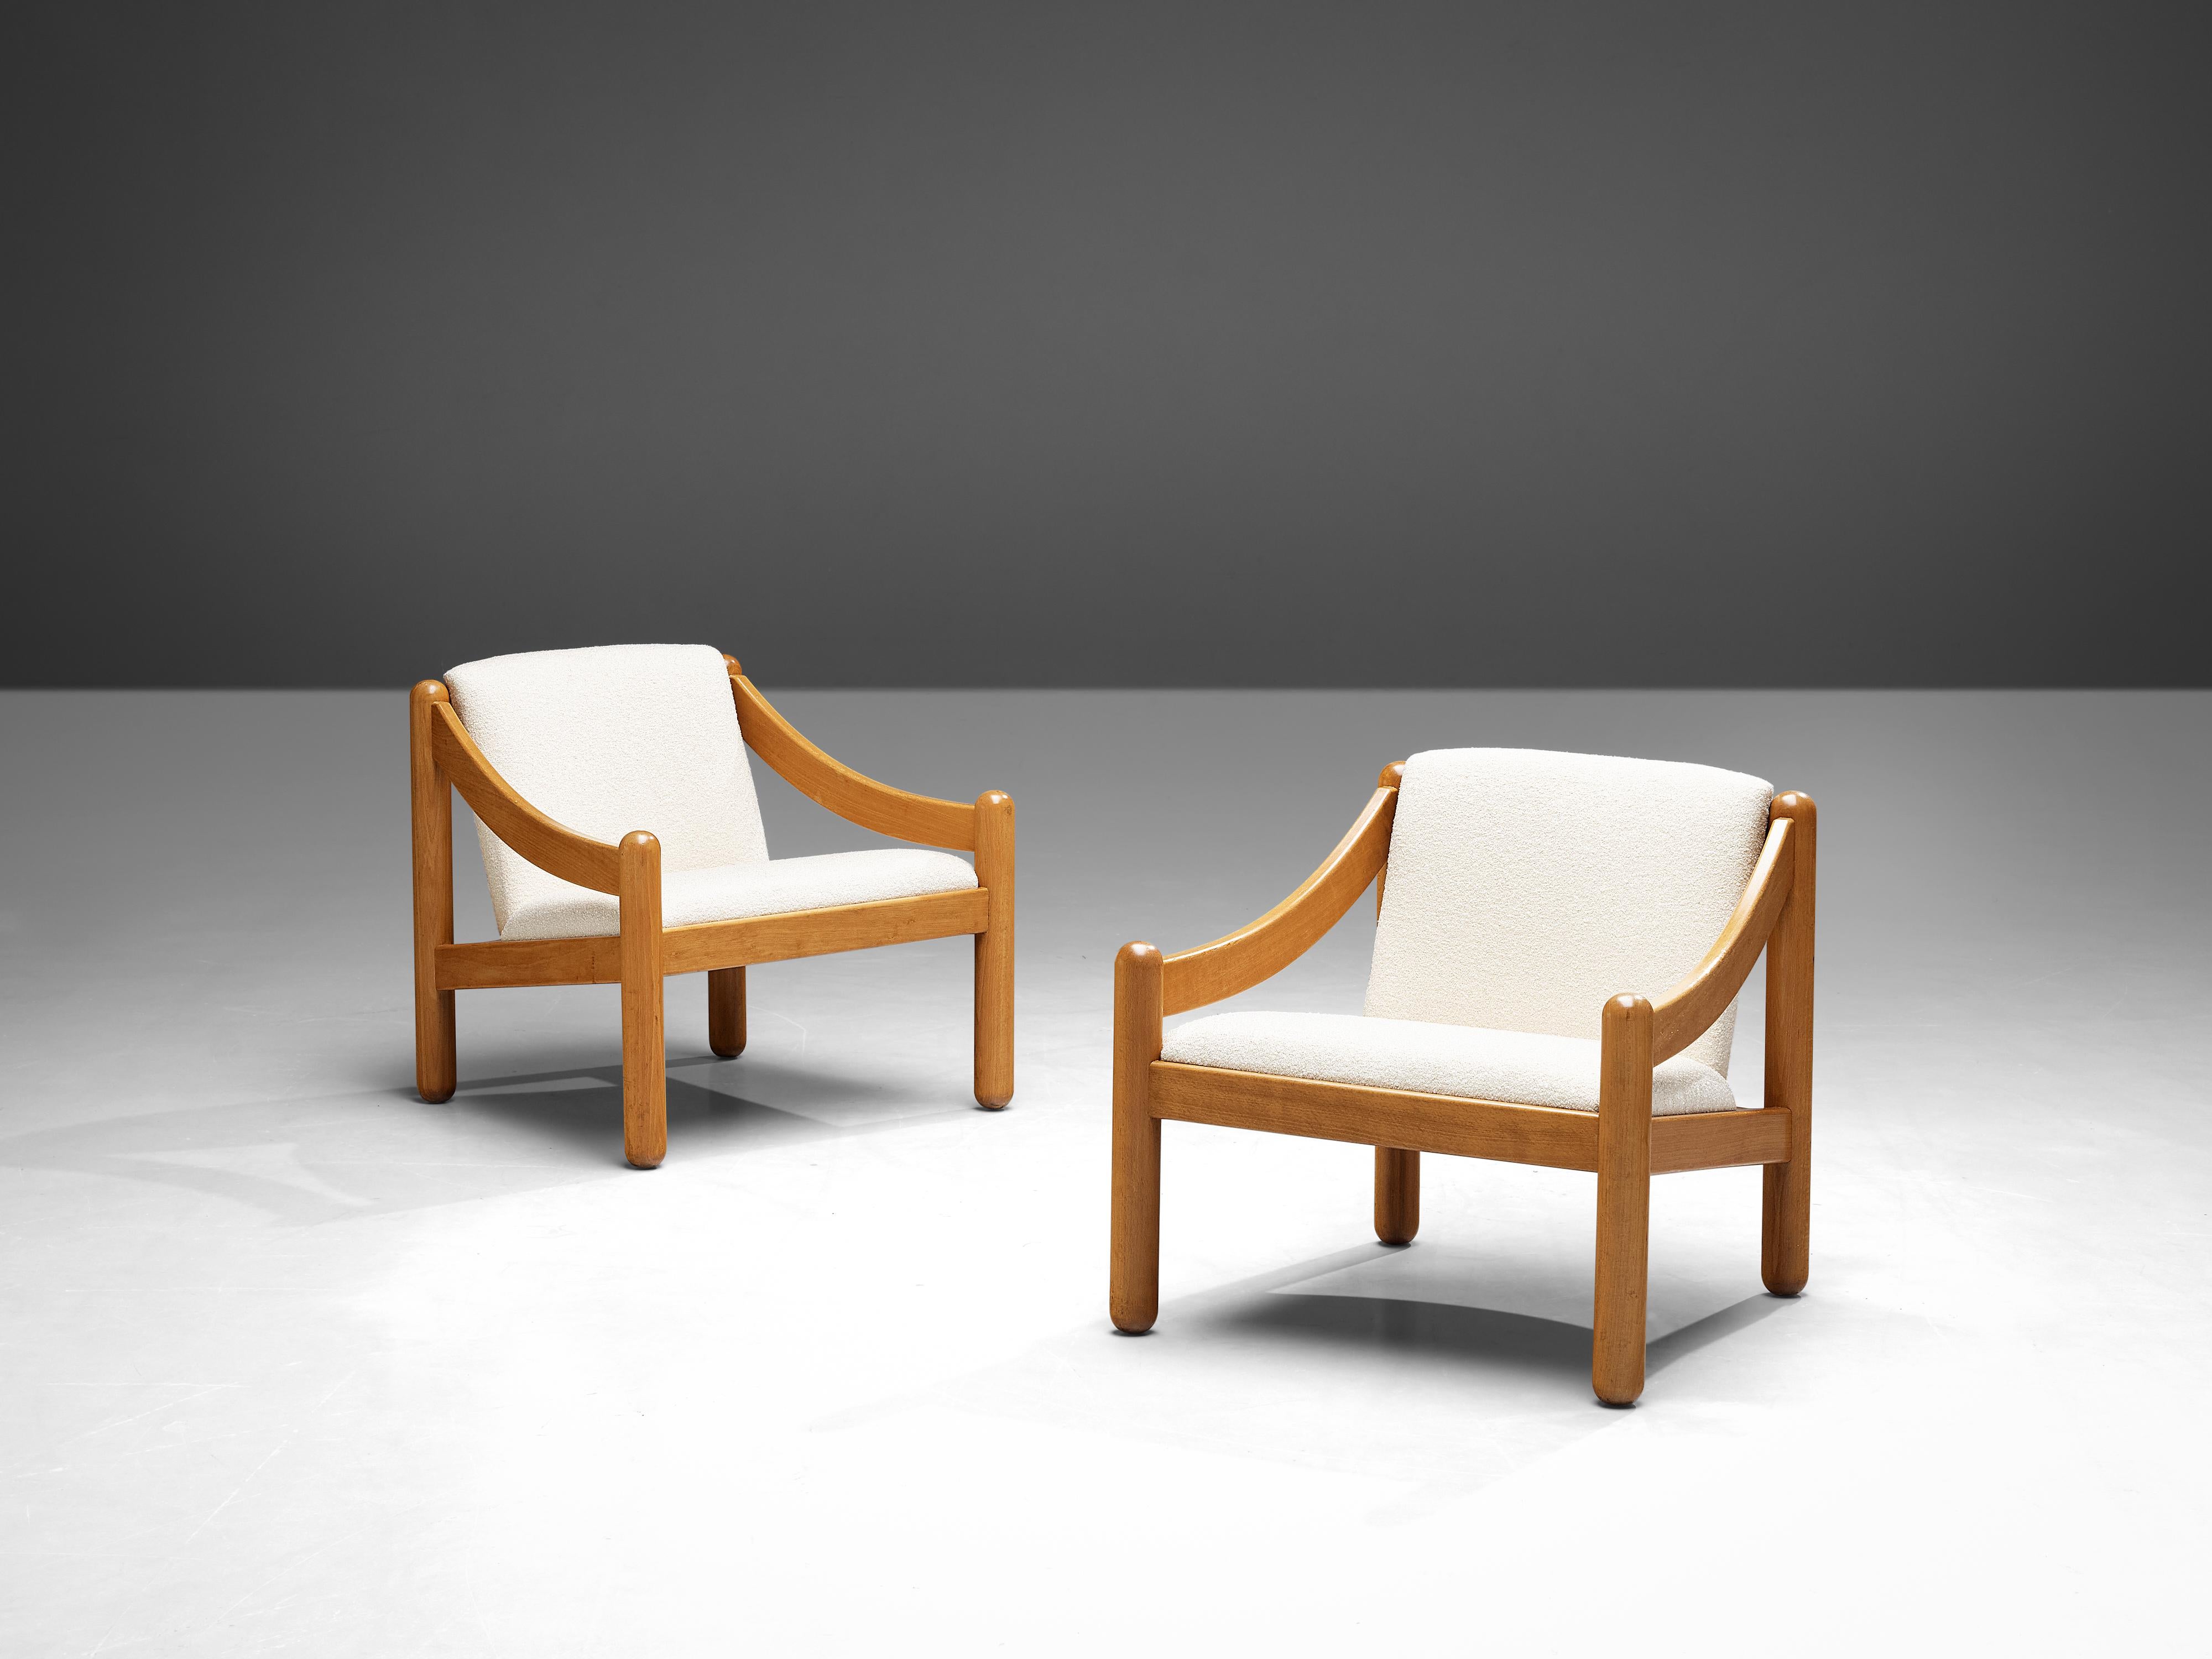 Vico Magistretti for Cassina, pair of ‘Carimate’ lounge chairs, beech, bouclé, Italy, designed circa 1960

The ‘Carimate’ lounge chair is one of Vico Magistretti’s most famous chairs. Originally, the chair had a red color and was designed for the